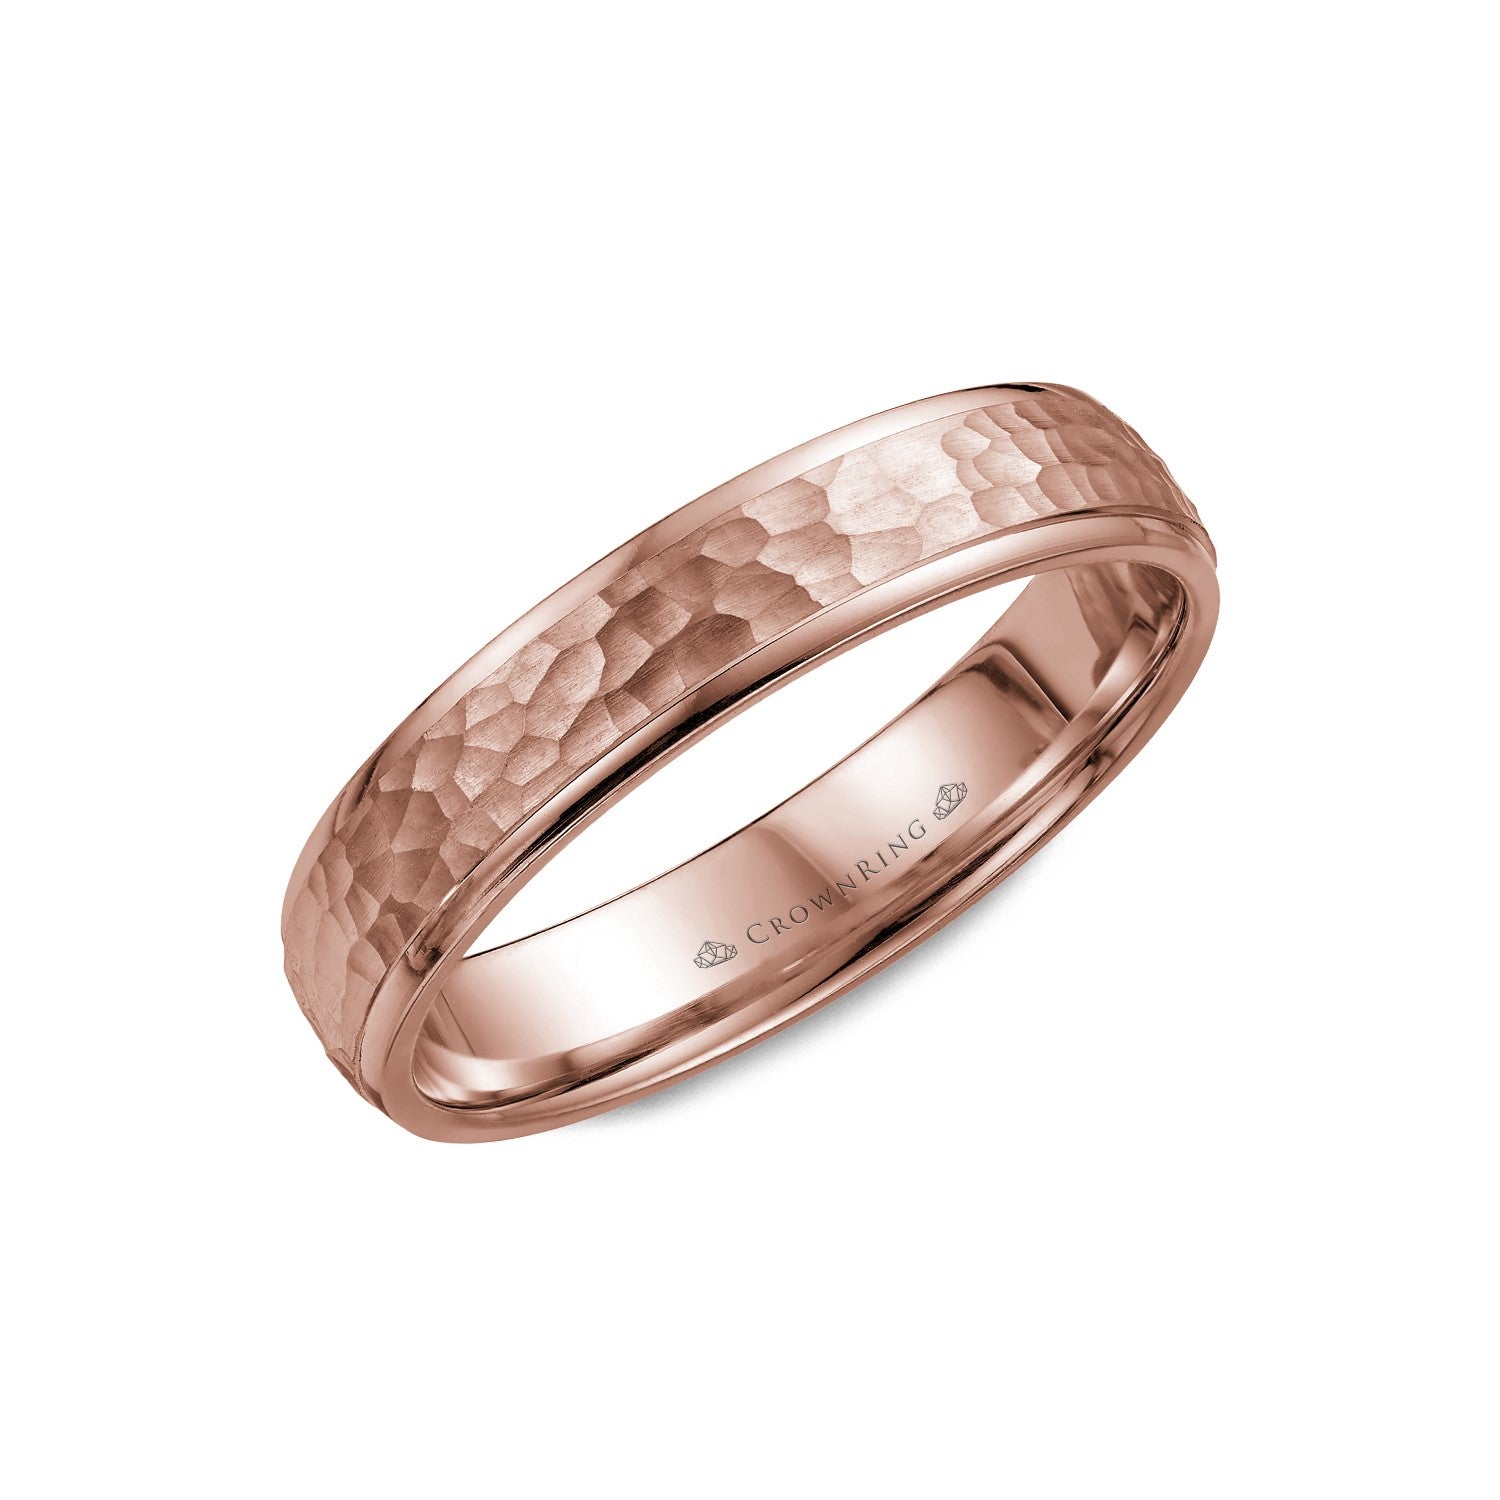 4.5mm Classic Wedding Band Frosted Hammered Center & High Polish Edges